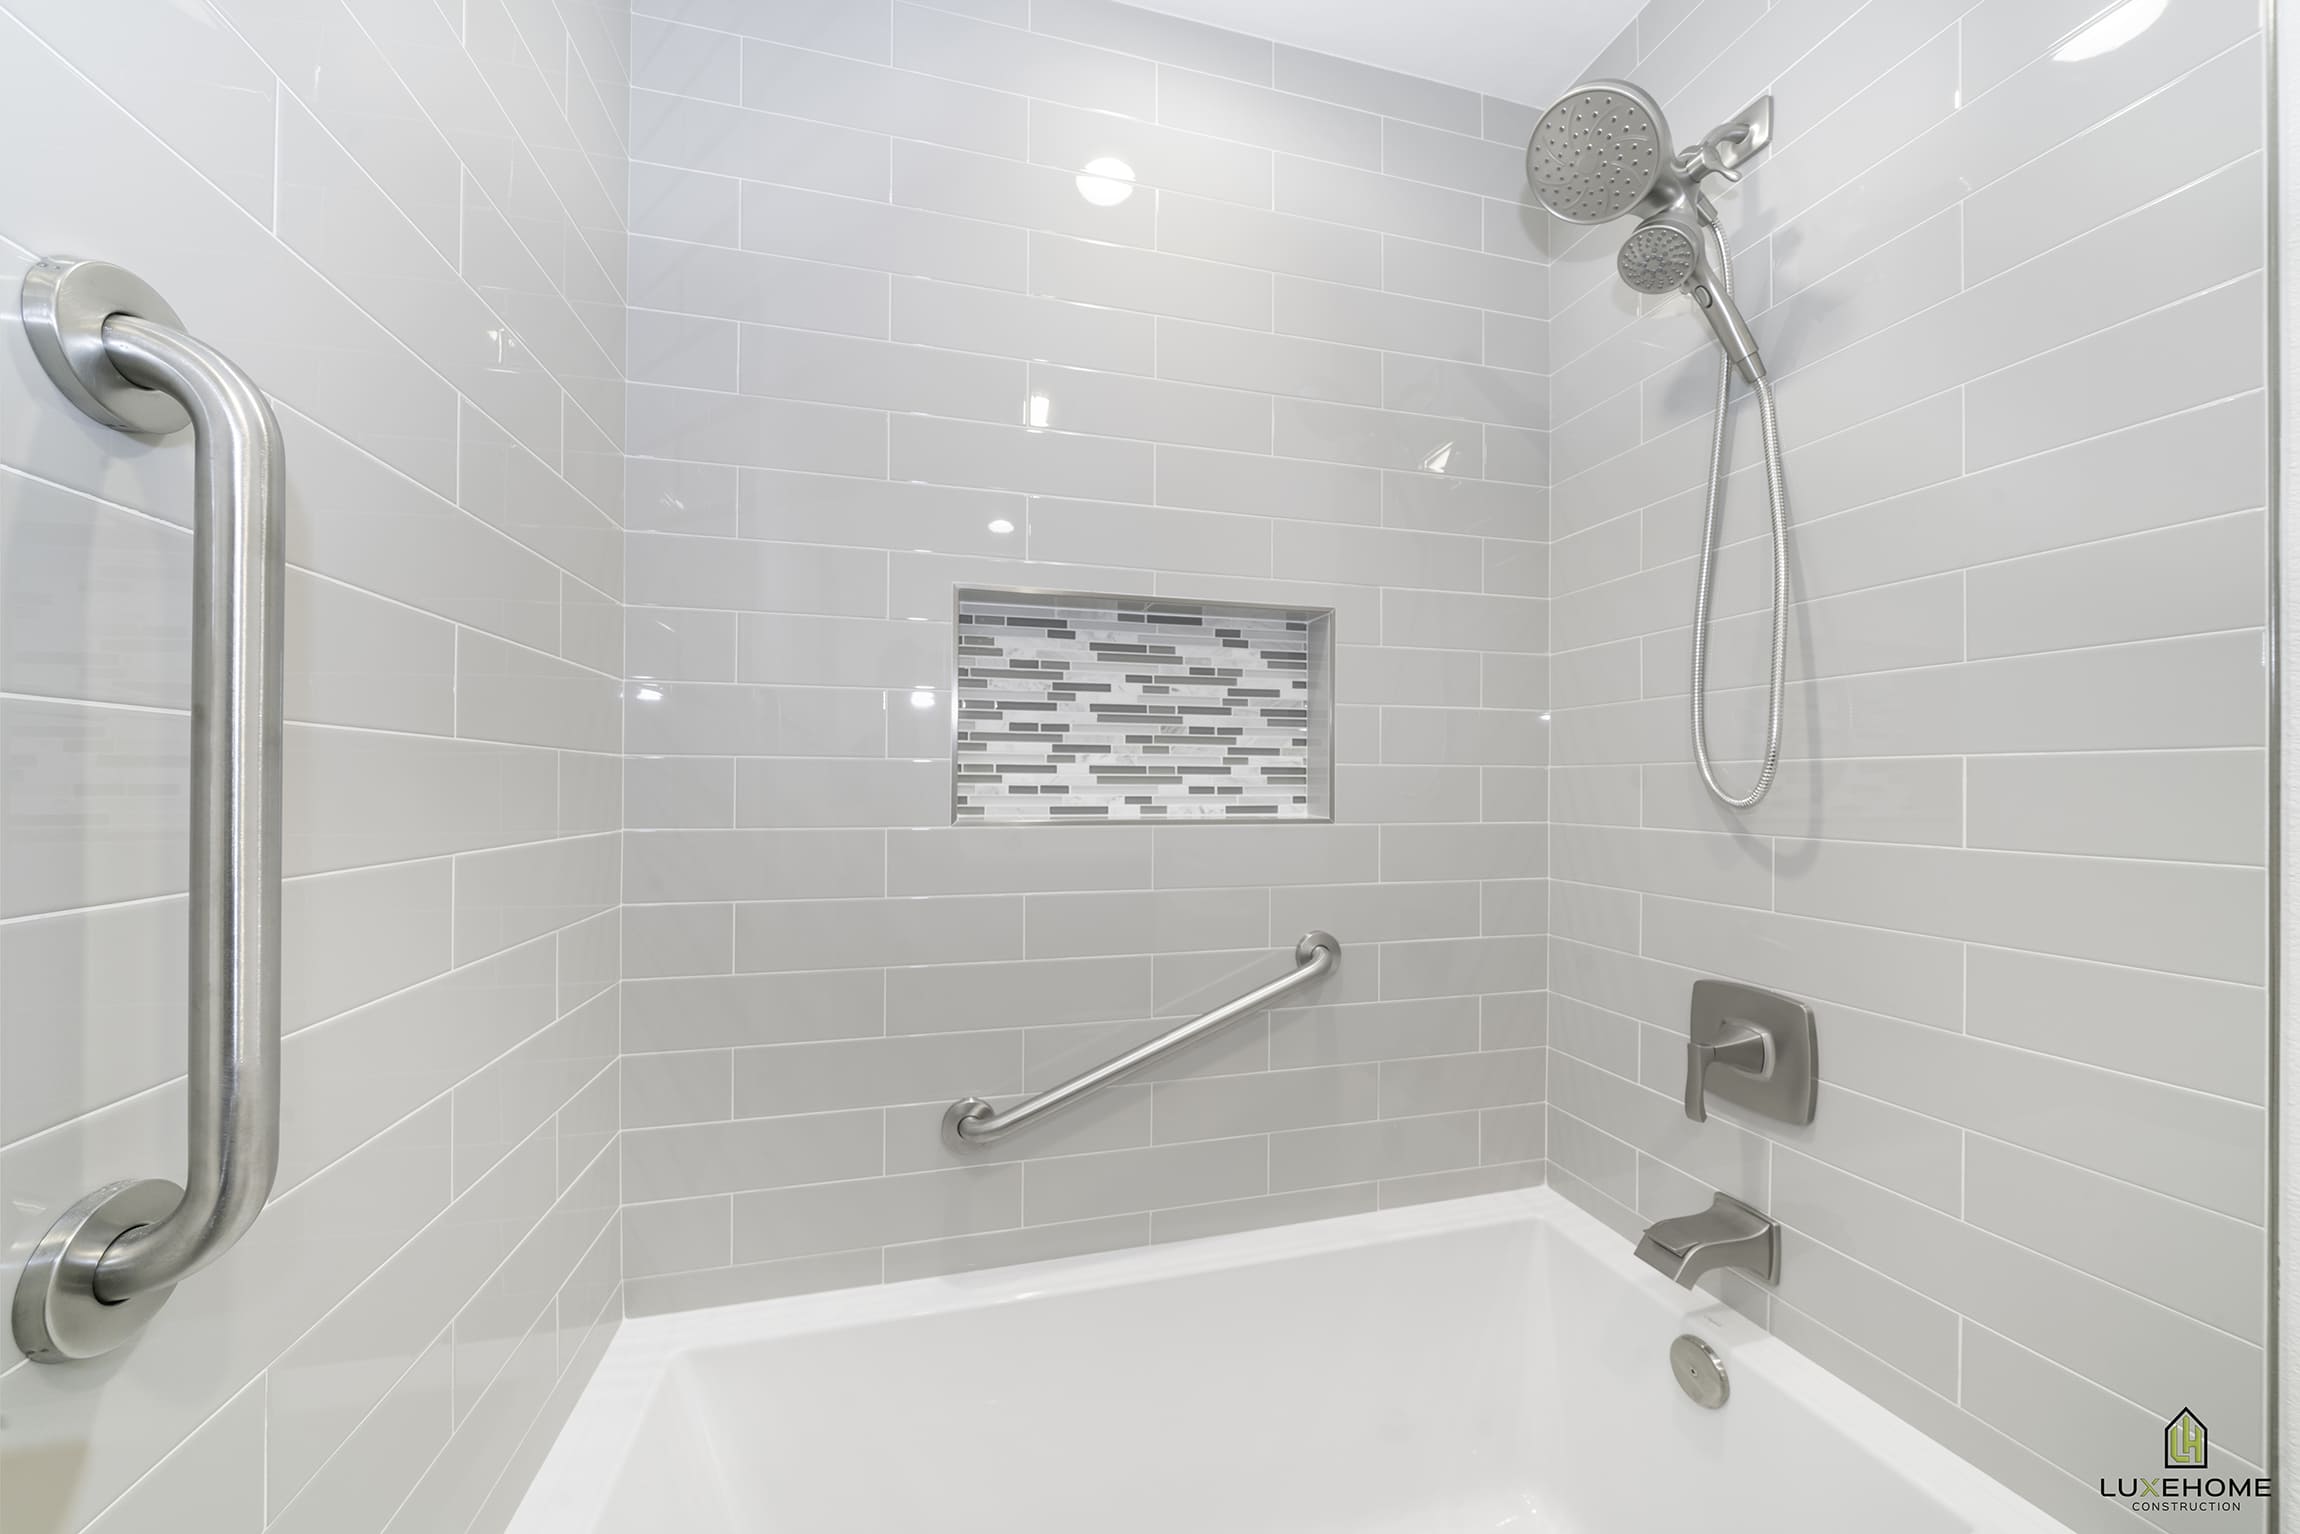 Beautiful bathroom remodel by Luxehome Construction in Elk Grove, CA 95624.